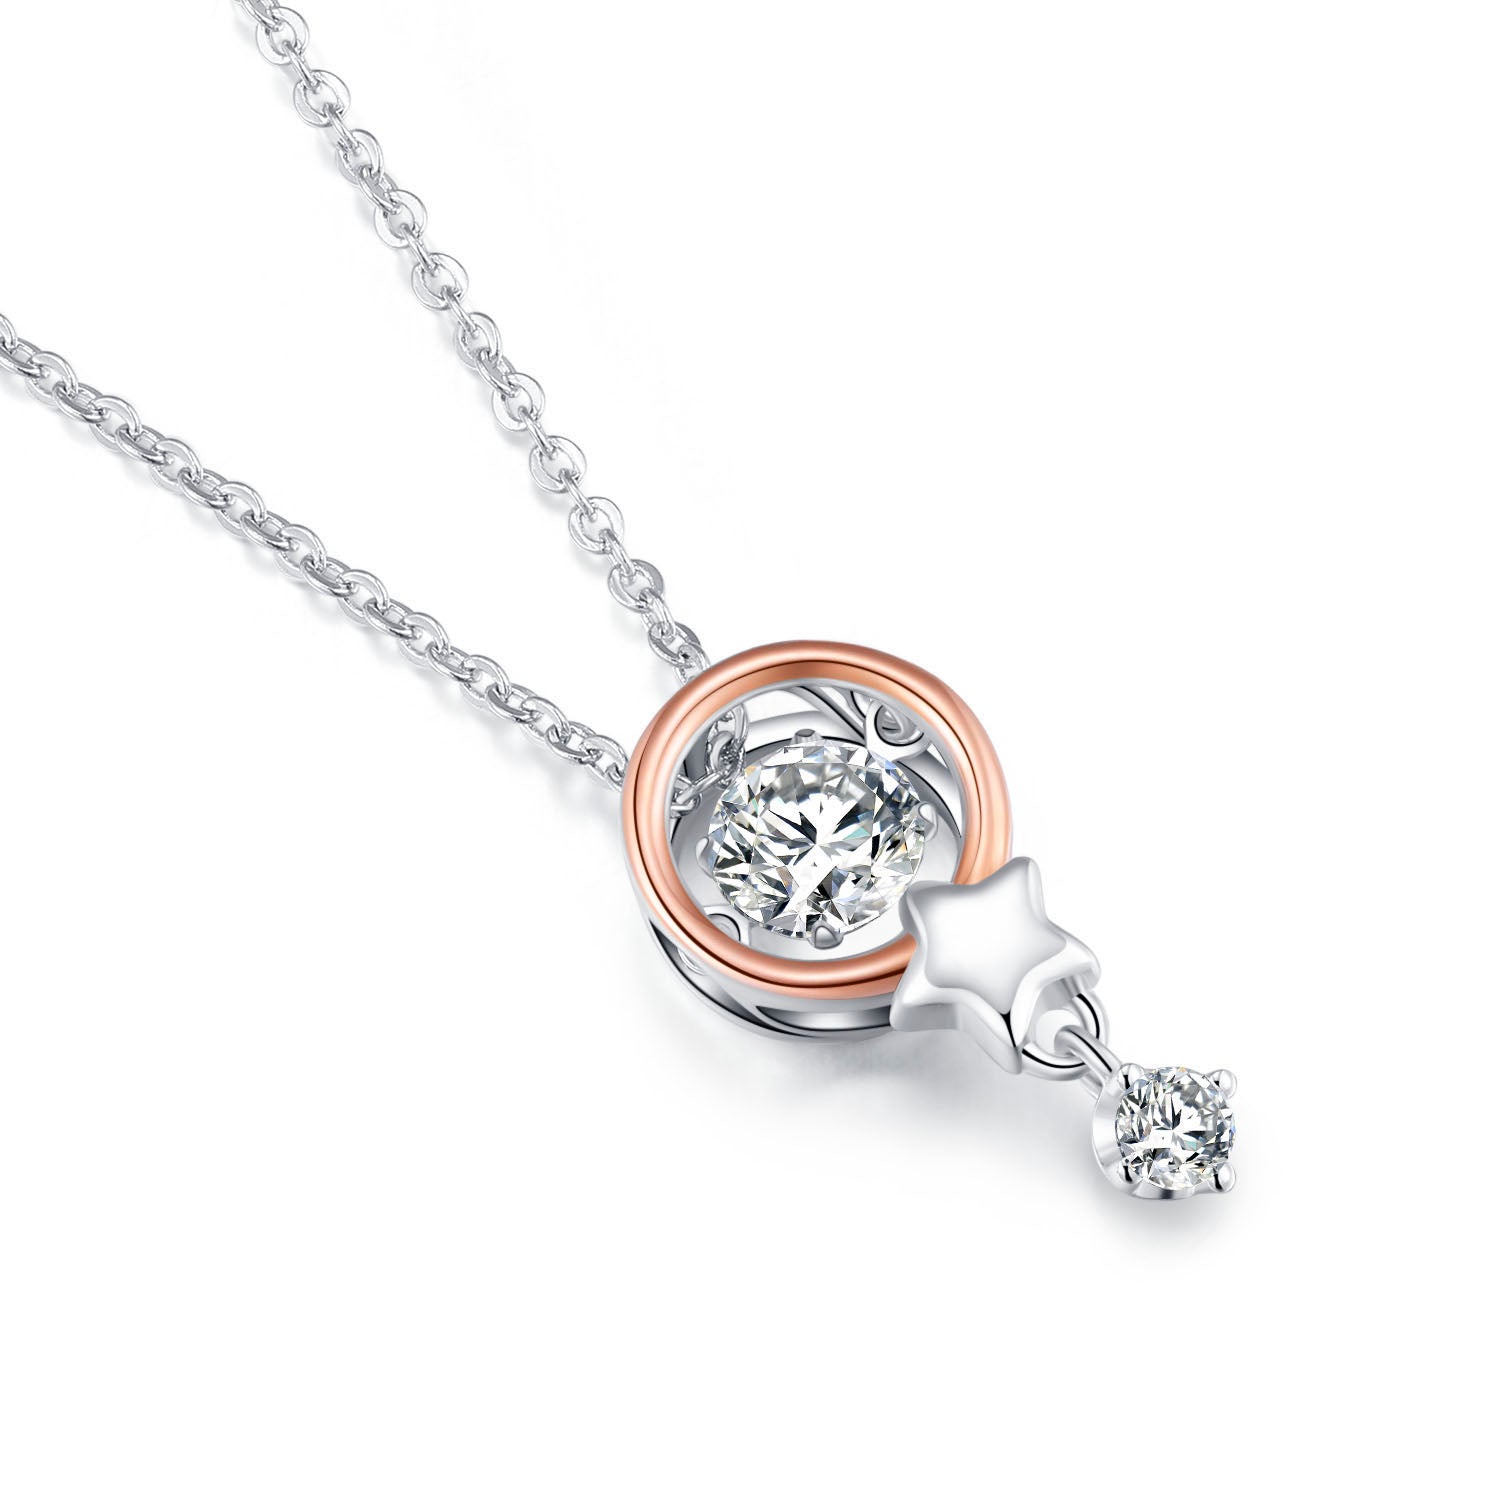 Elegant and smart two-tone 925 sterling silver necklace